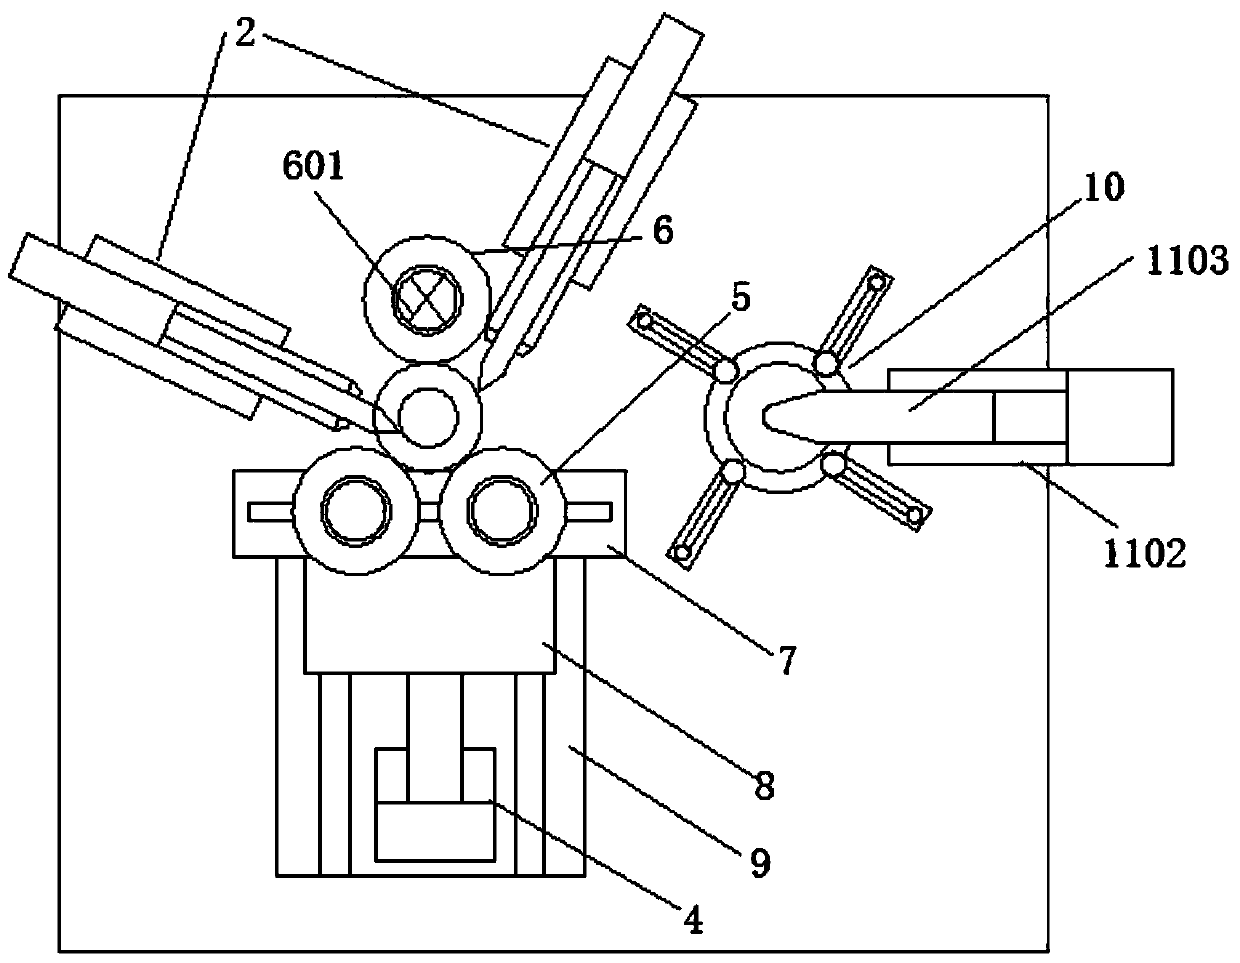 Full-automatic oil seal trimming device